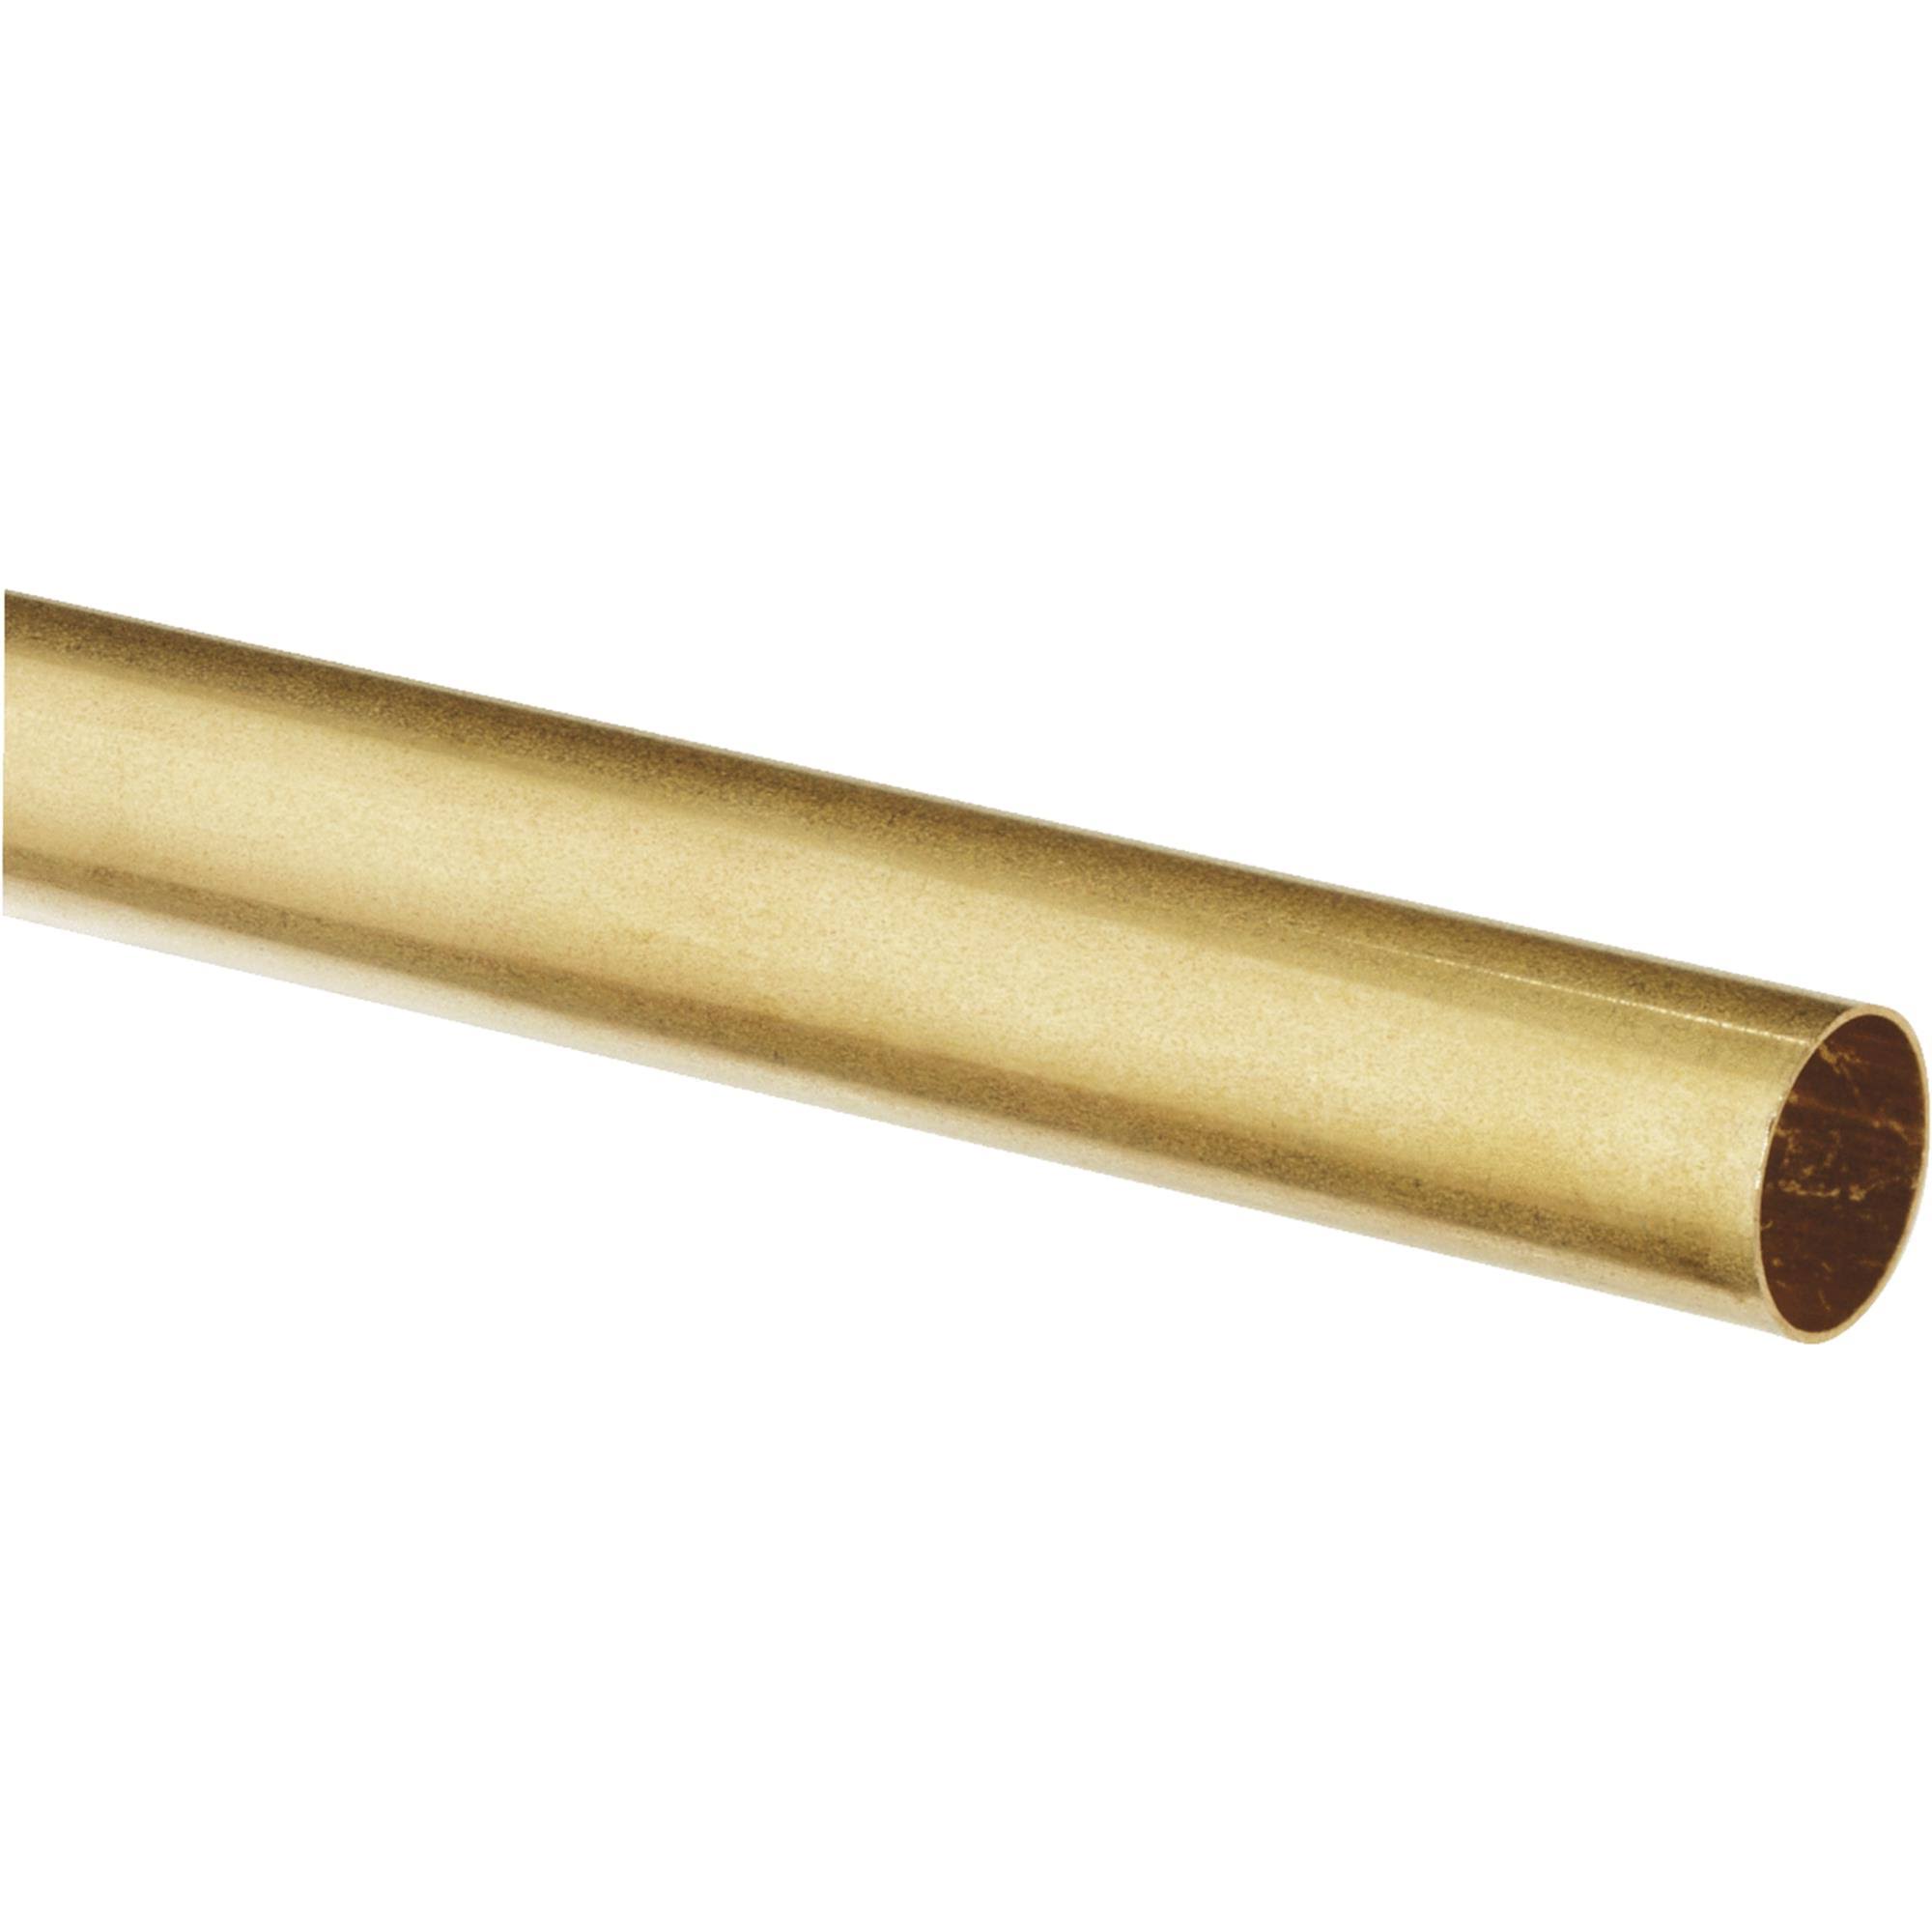 K and S Engineering Brass Tube - Round, 21/32" x 12"